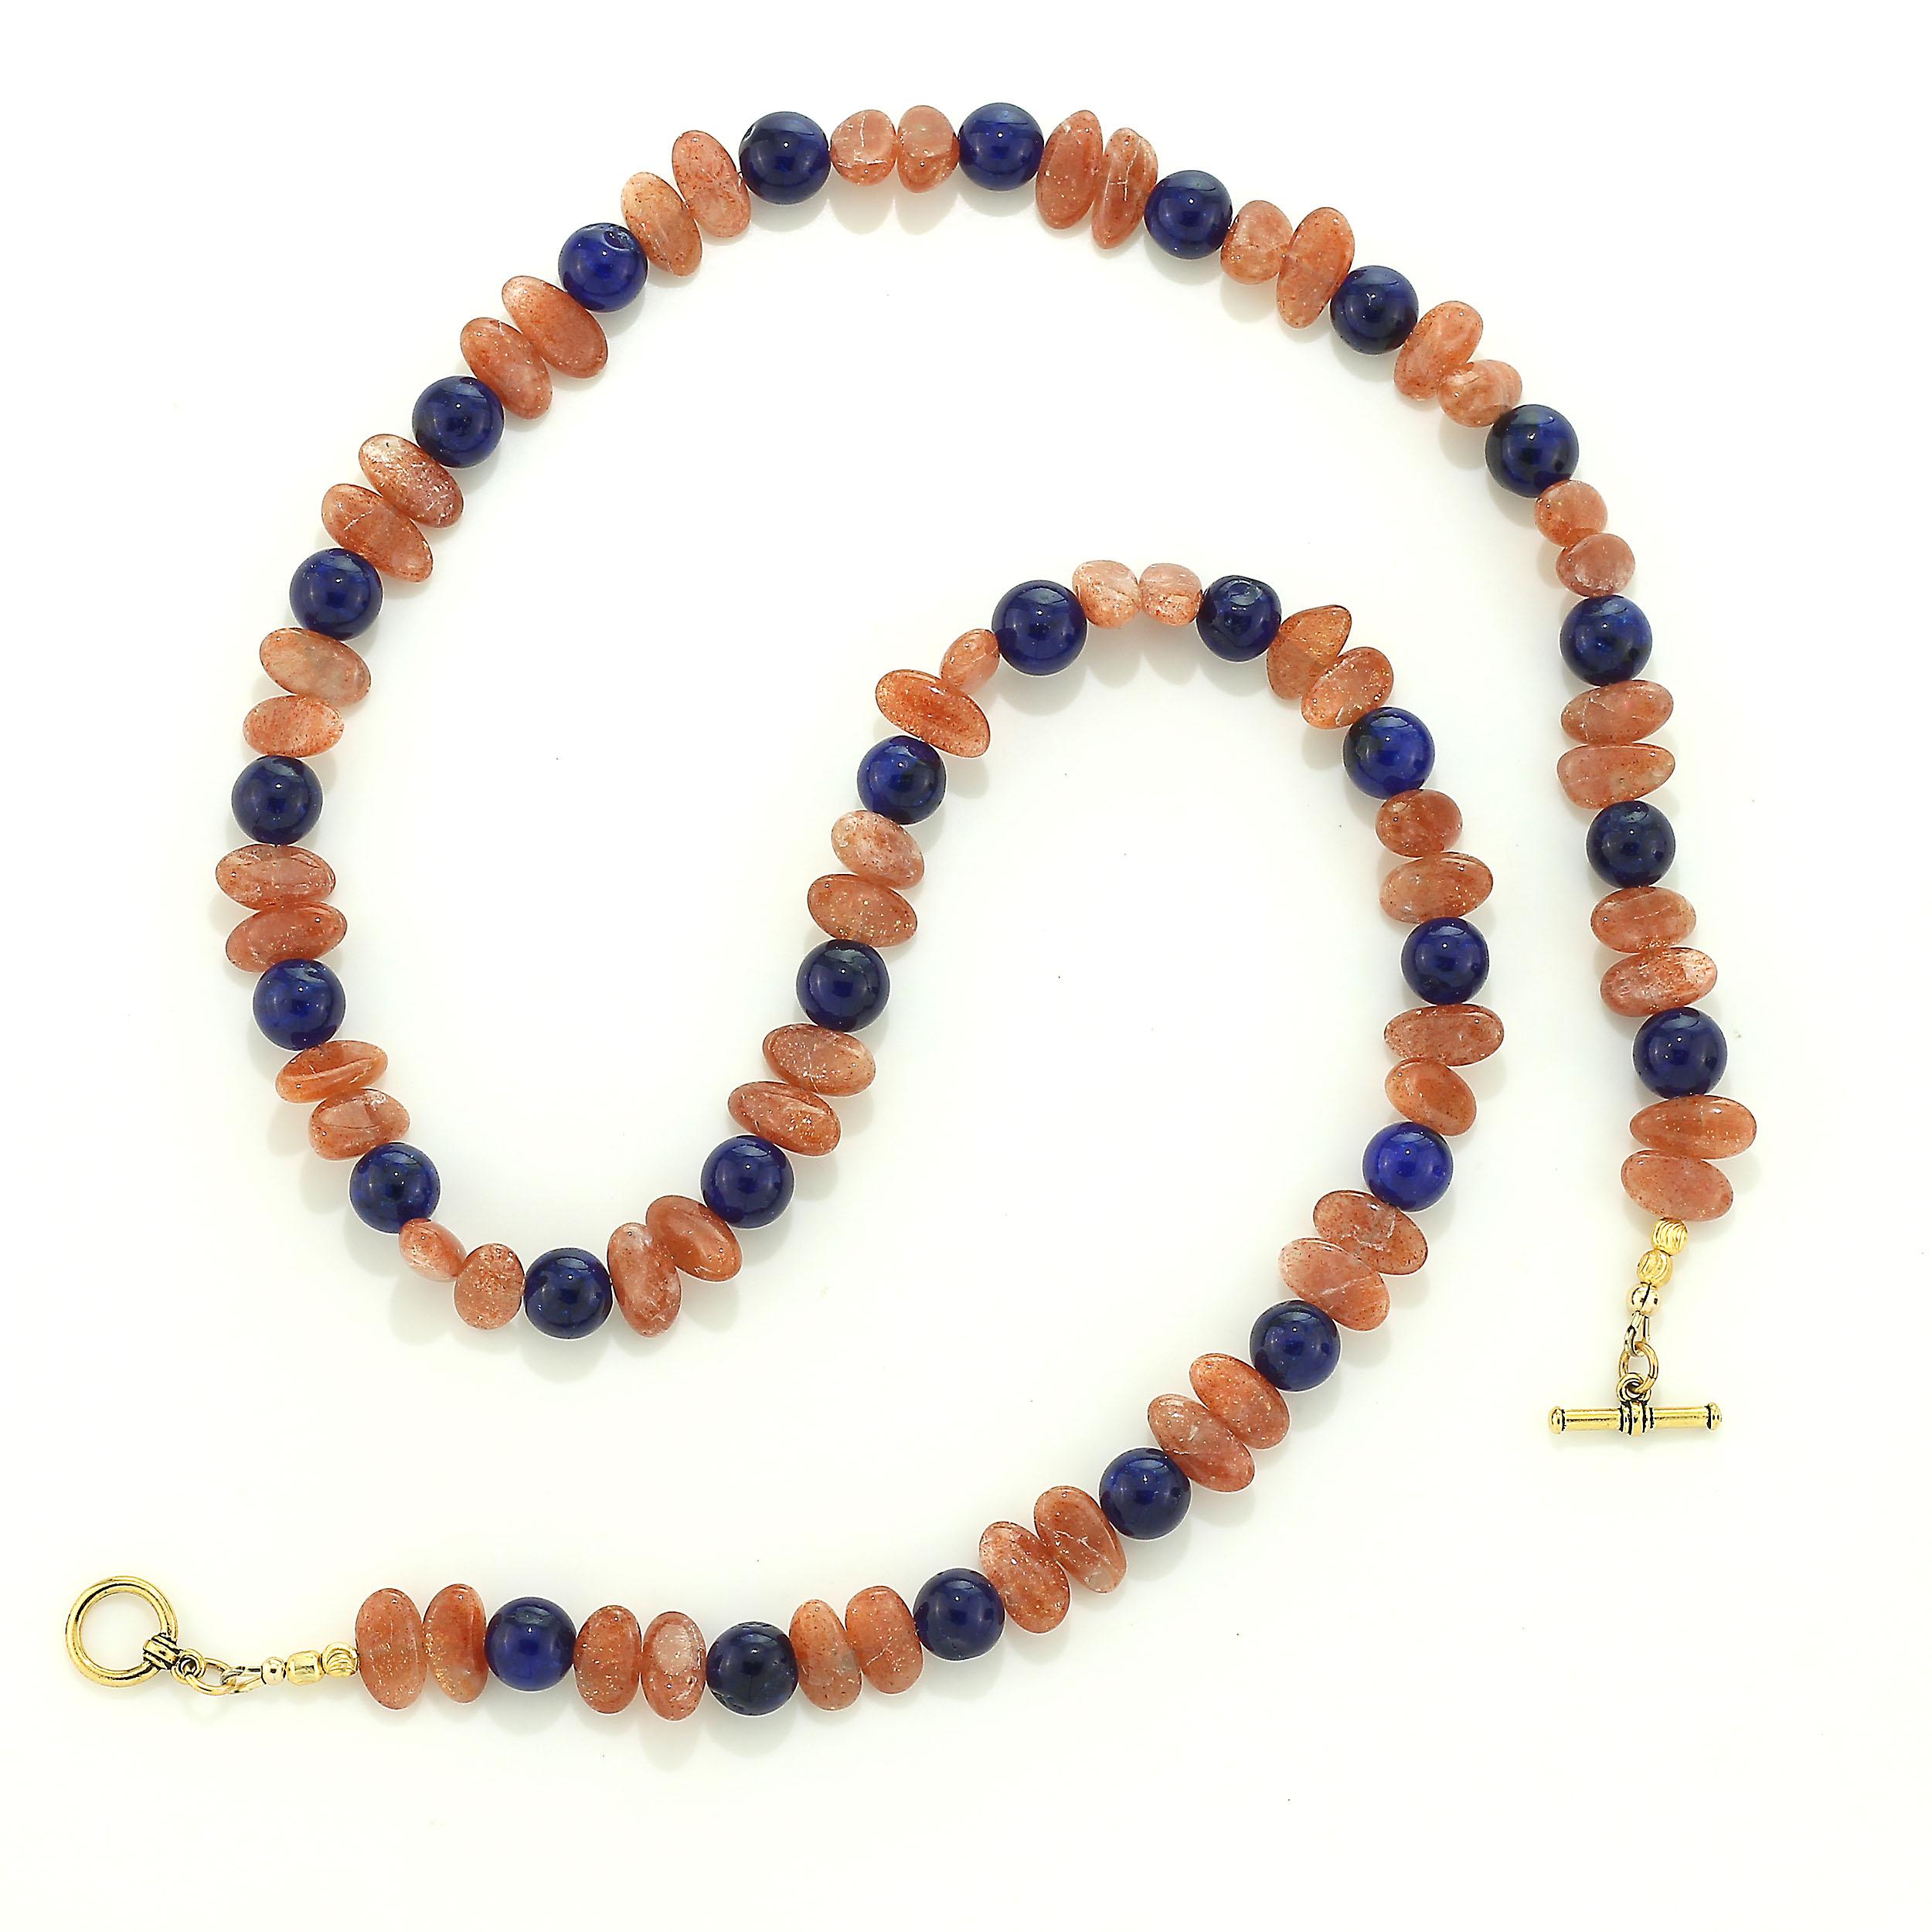 Women's or Men's  AJD Necklace of Fascinating Oval Glittering Sunstone and Blue Agate Gift Idea! For Sale